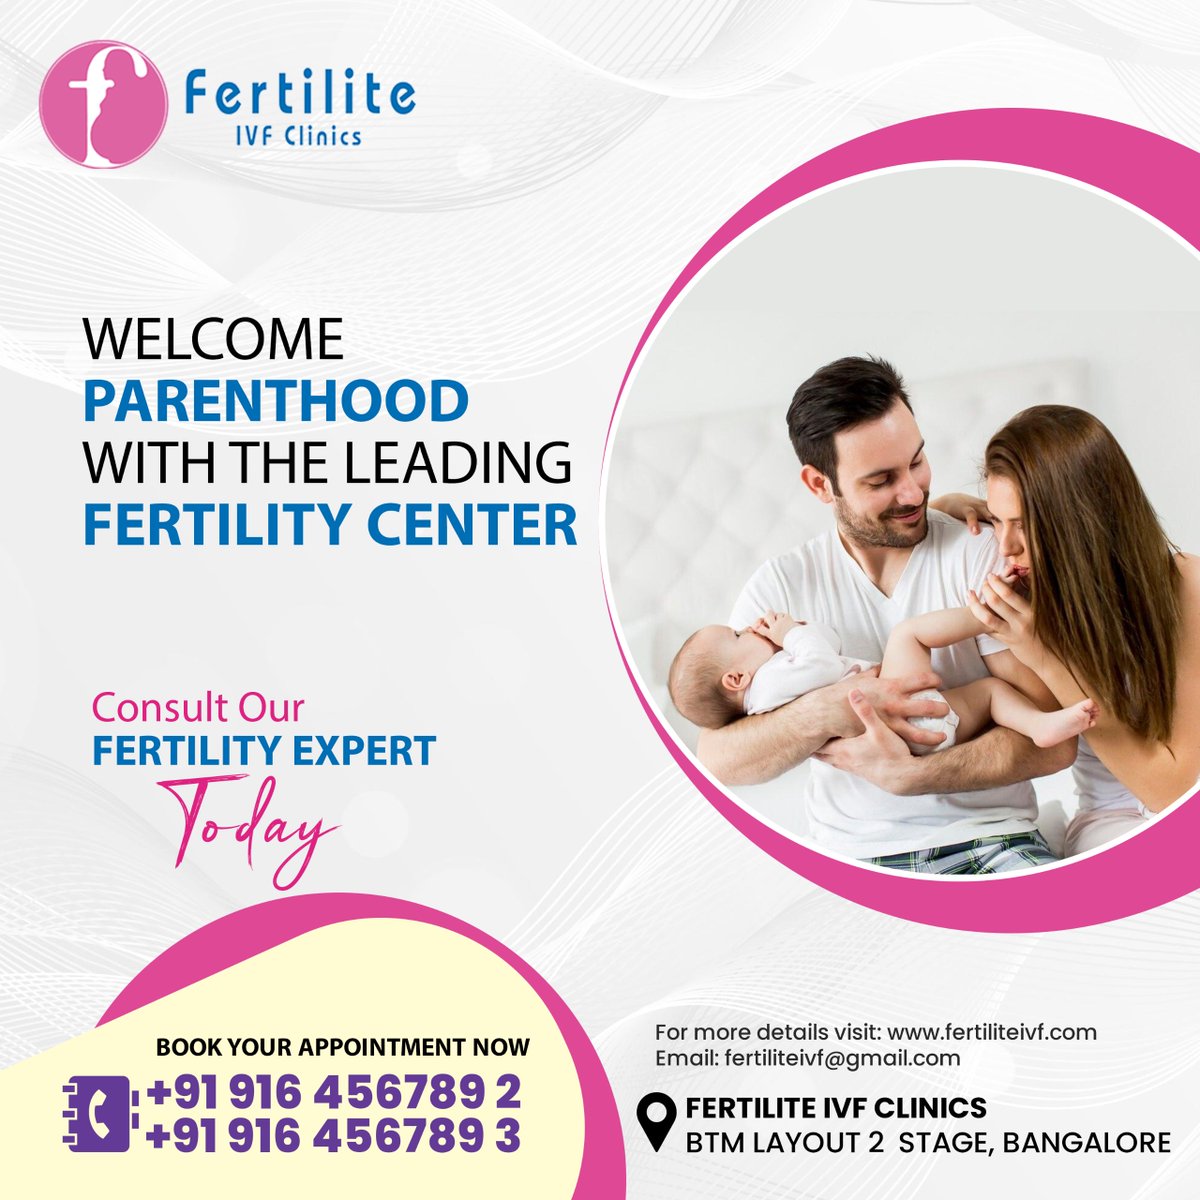 👶🌟 **Welcome Parenthood with Fertilite IVF Clinics!** 🌟👶

📅 **Book Your Appointment Now!**
📞 +91 916 4567892 
📞 +91 916 4567893

🌐 For more details, visit: [fertiliteivf.com]

🏥 **Fertilite IVF Clinics BTM Layout 2 Stage, Bangalore**

#FertiliteIVF #IVF #Fertility